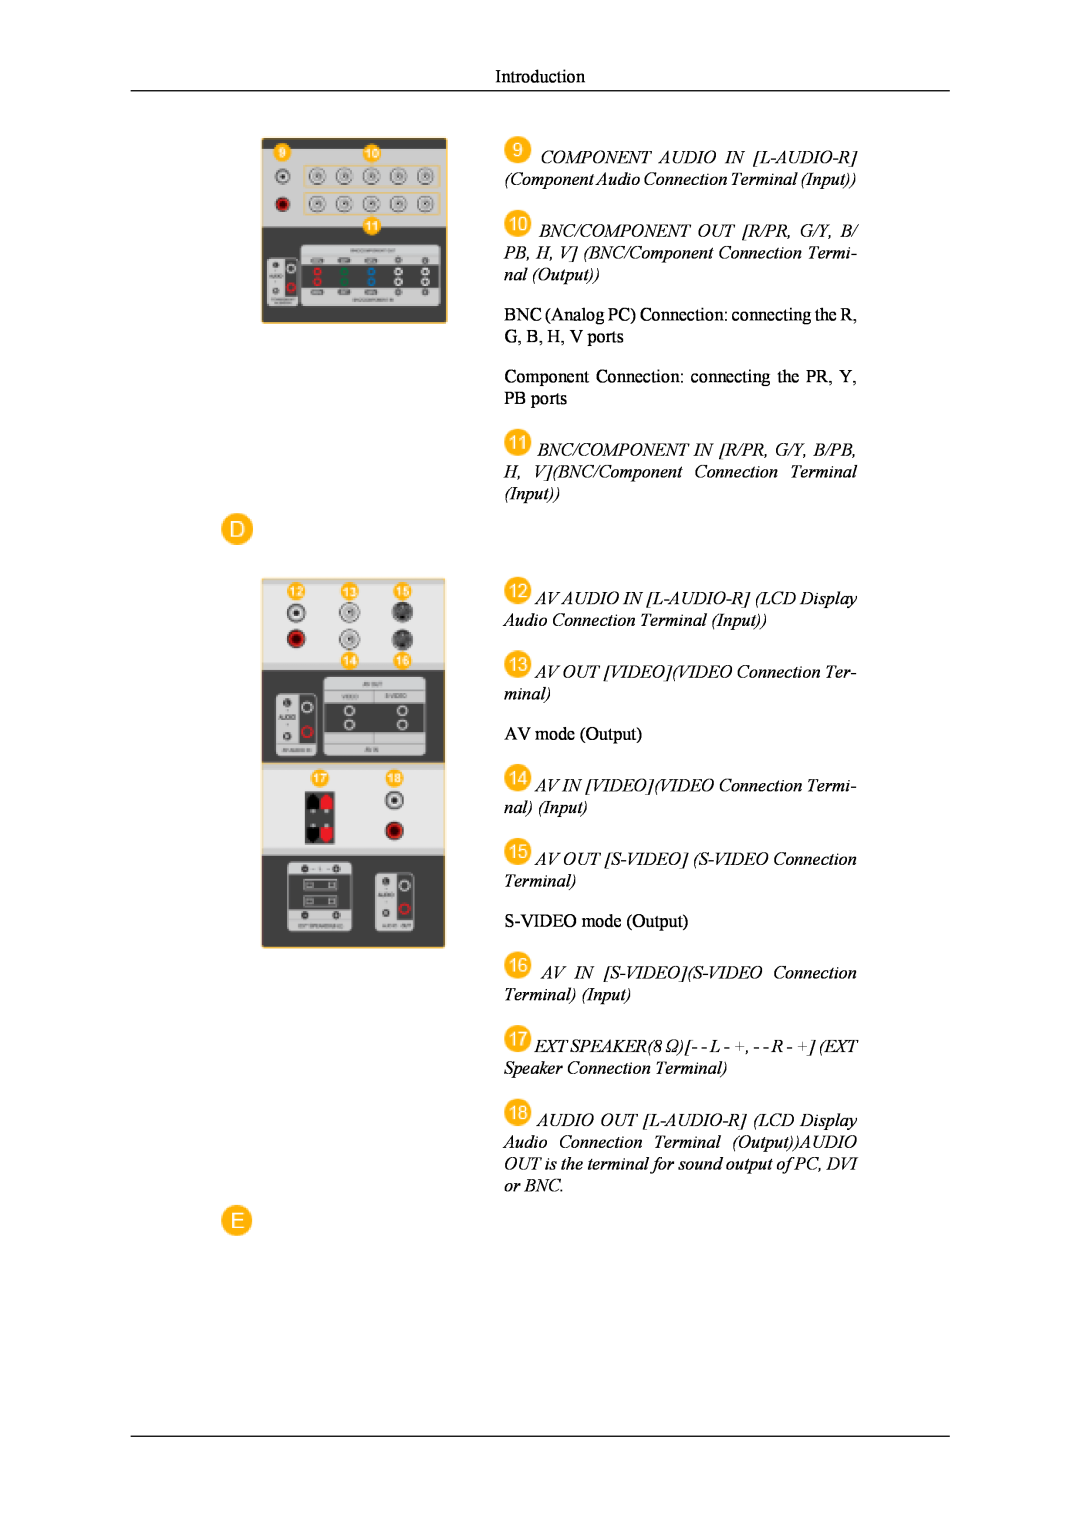 Samsung 400UXn user manual Introduction, BNC Analog PC Connection connecting the R, G, B, H, V ports, AV mode Output 